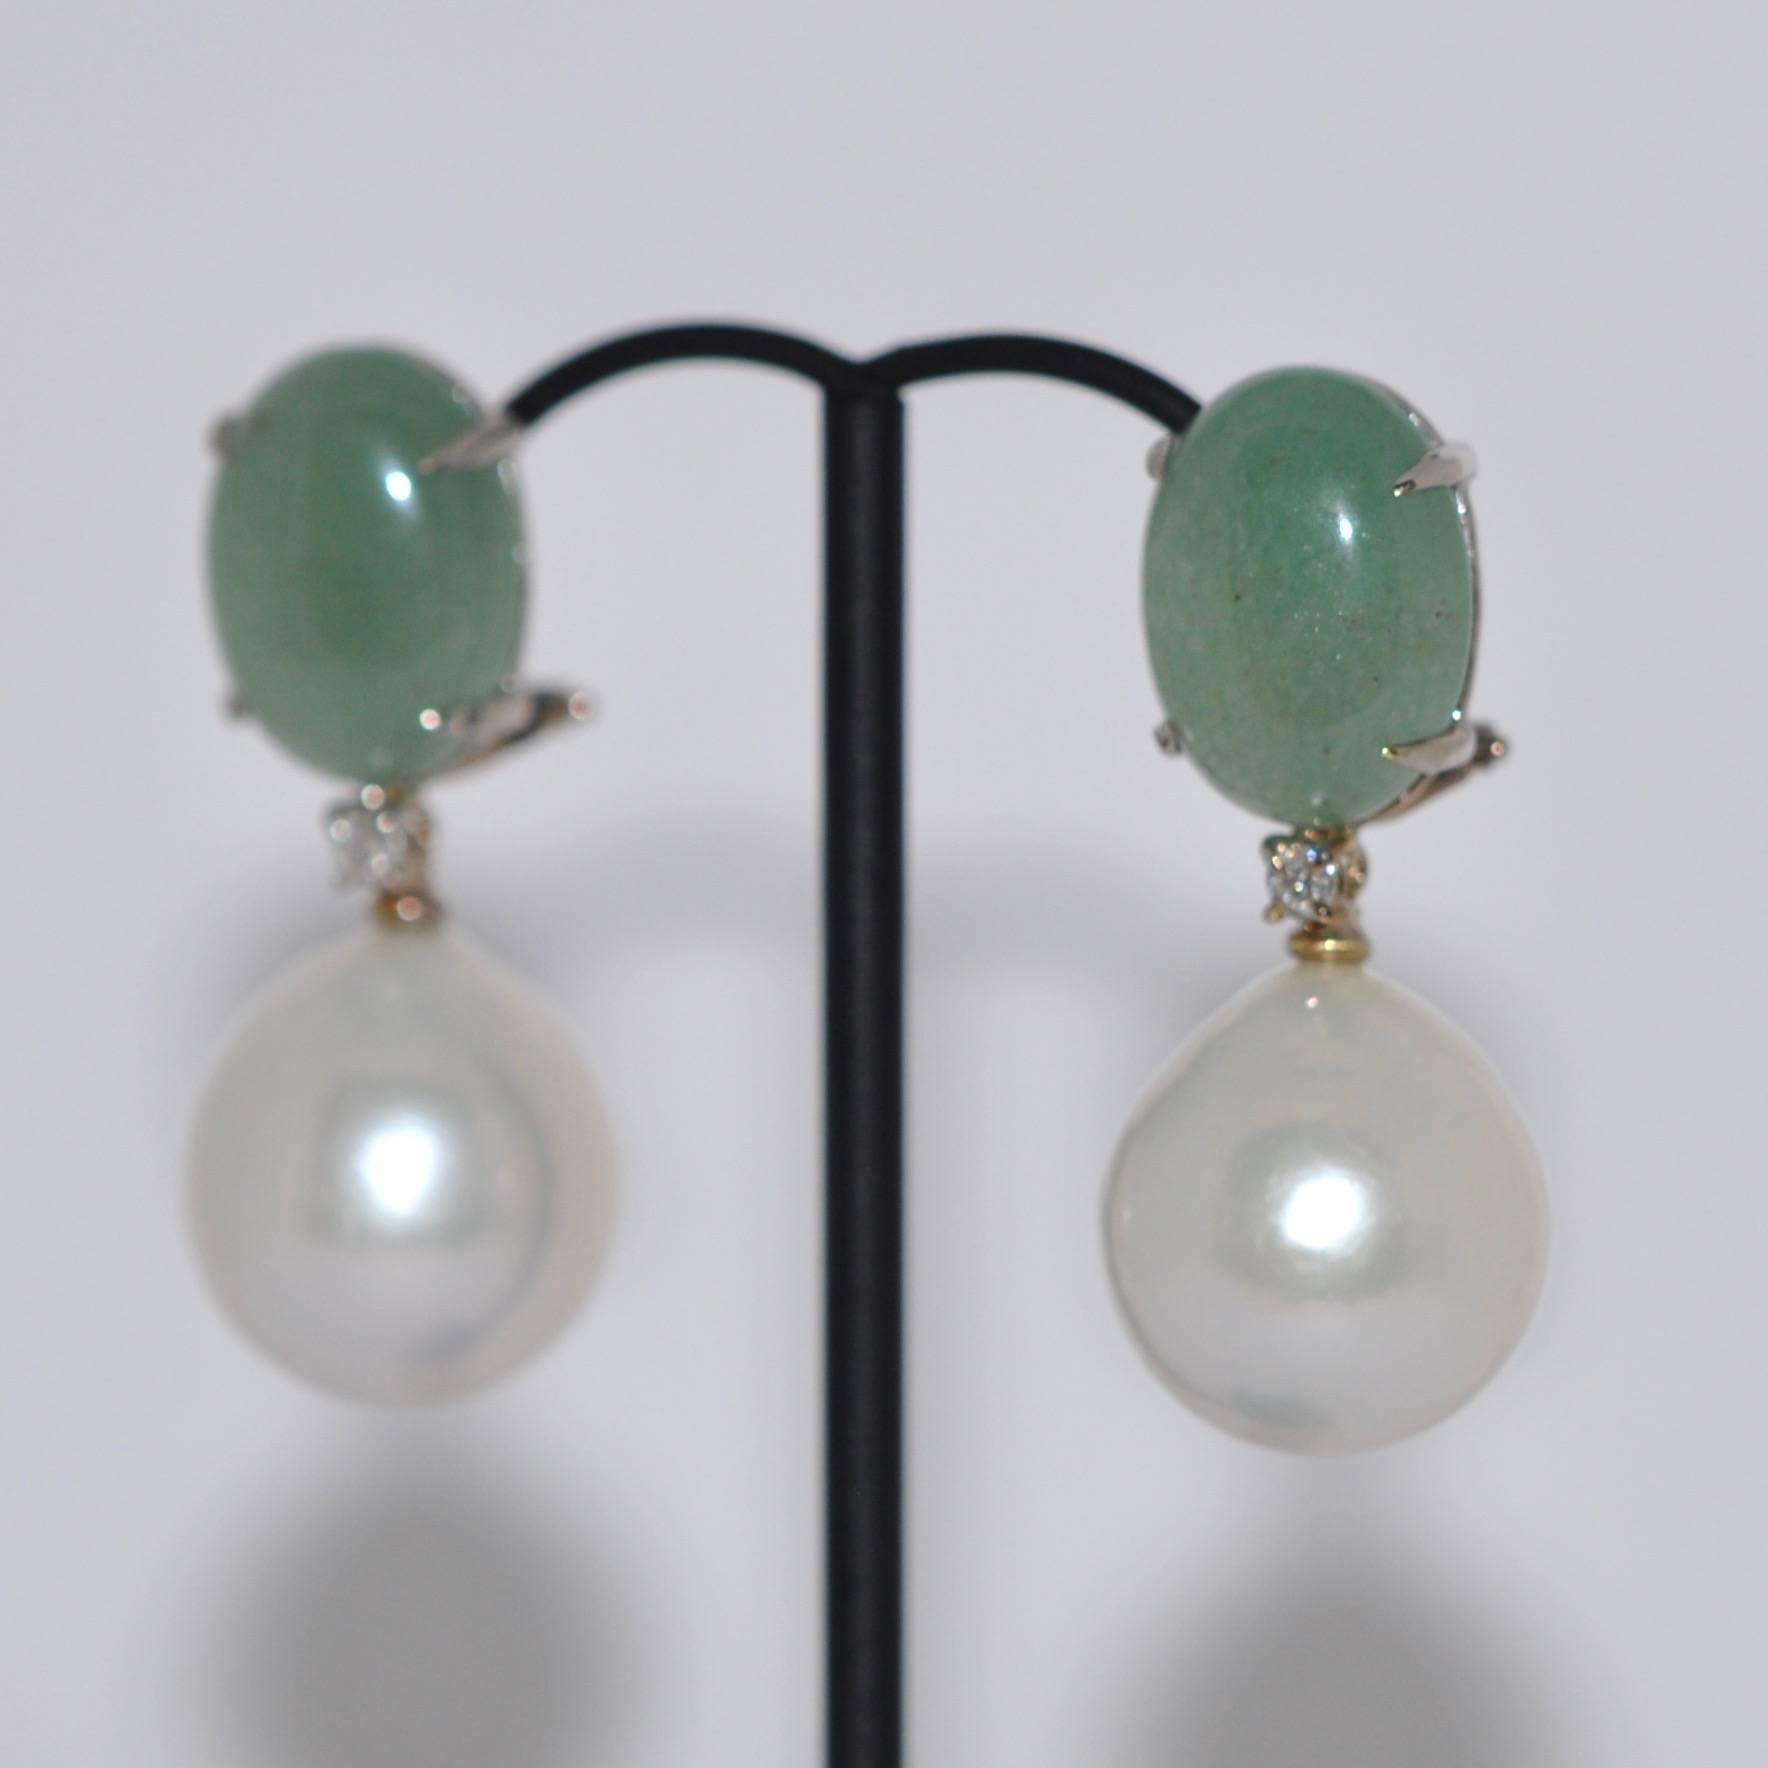 Let yourself be seduced by the timeless beauty of these sumptuous 18k white gold dangling earrings, showcasing a perfect harmony between dazzling freshwater pearls, mesmerizing green agates and sparkling diamonds of exceptional quality. , totaling